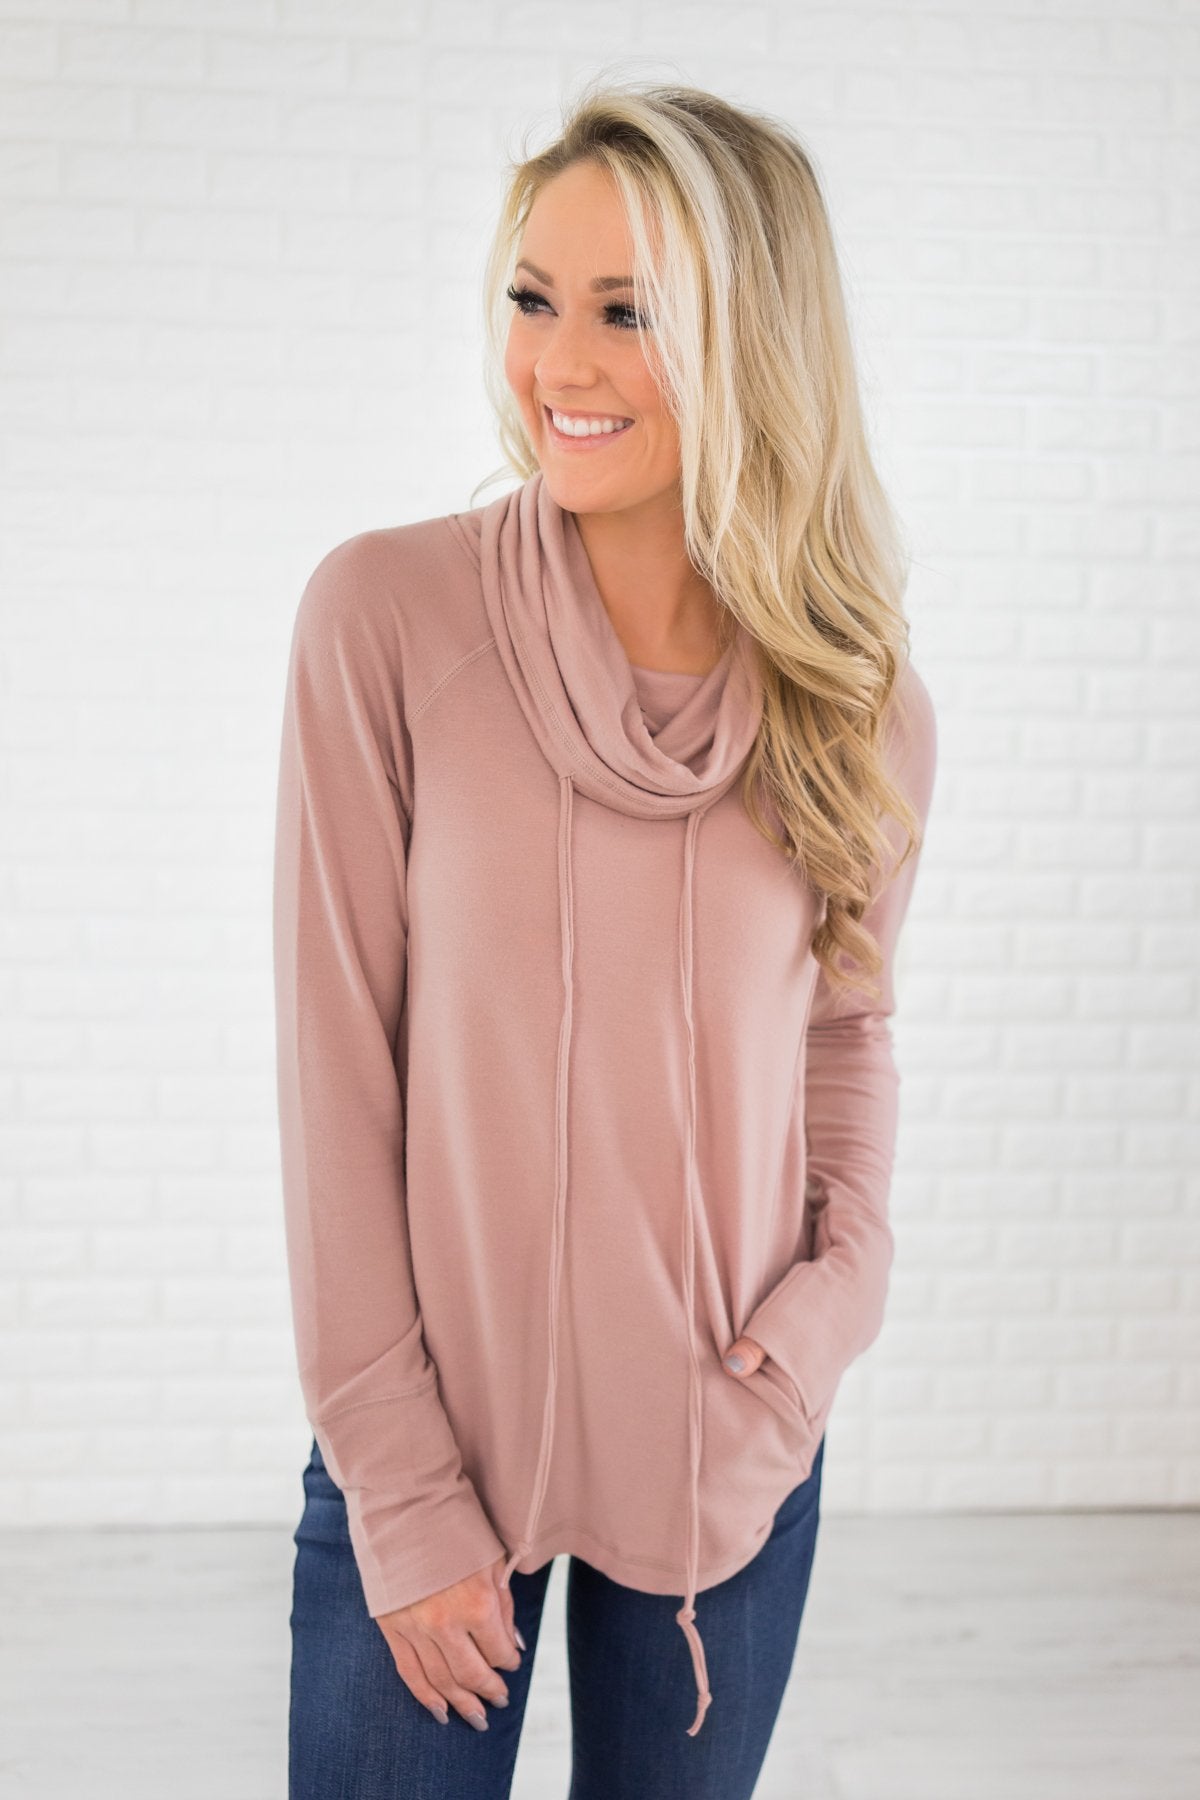 Rose Cowl Neck Top